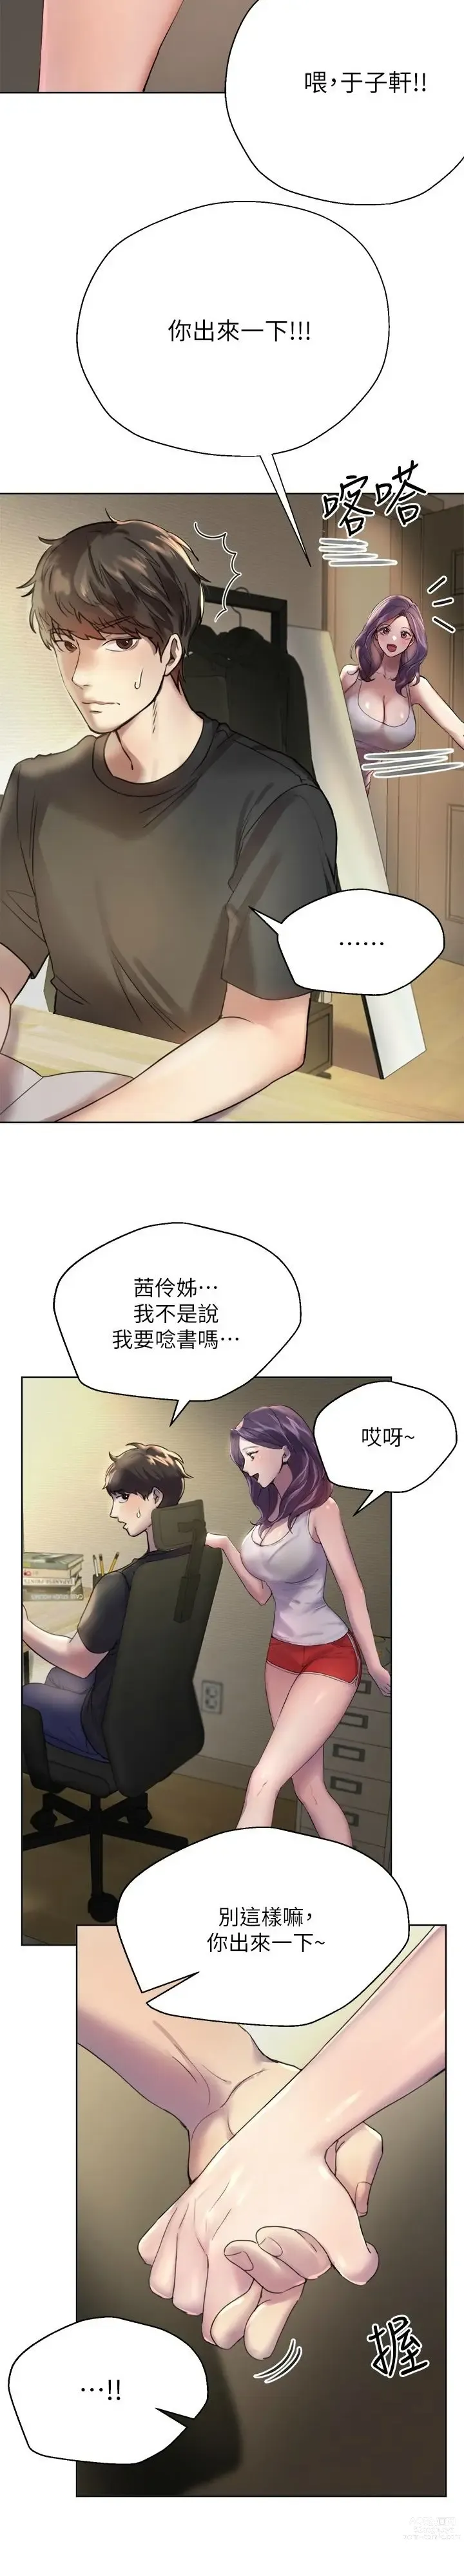 Page 7 of manga 姐姐们的调教／My Sister’s Friends